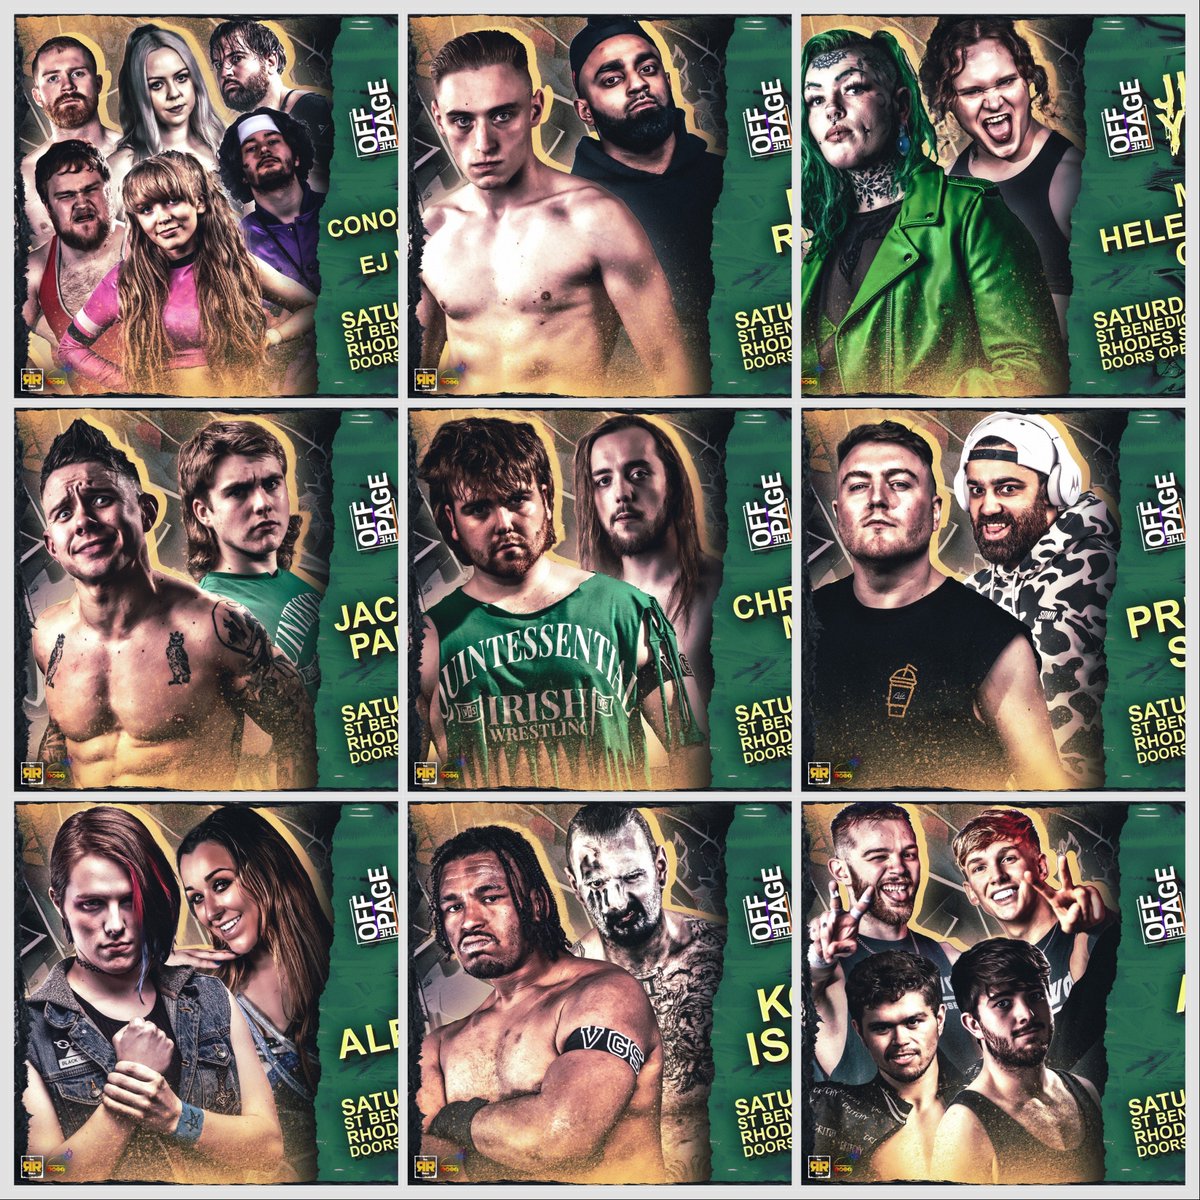 Check out the full card for #JHYLI and look at all this WRESTLING we're giving you on May 18th with tickets starting from just £10! 😱 Don't miss Warrington's biggest wrestling show on May 18th and get down to OTP! Get your tickets here: skiddle.com/whats-on/Warri…